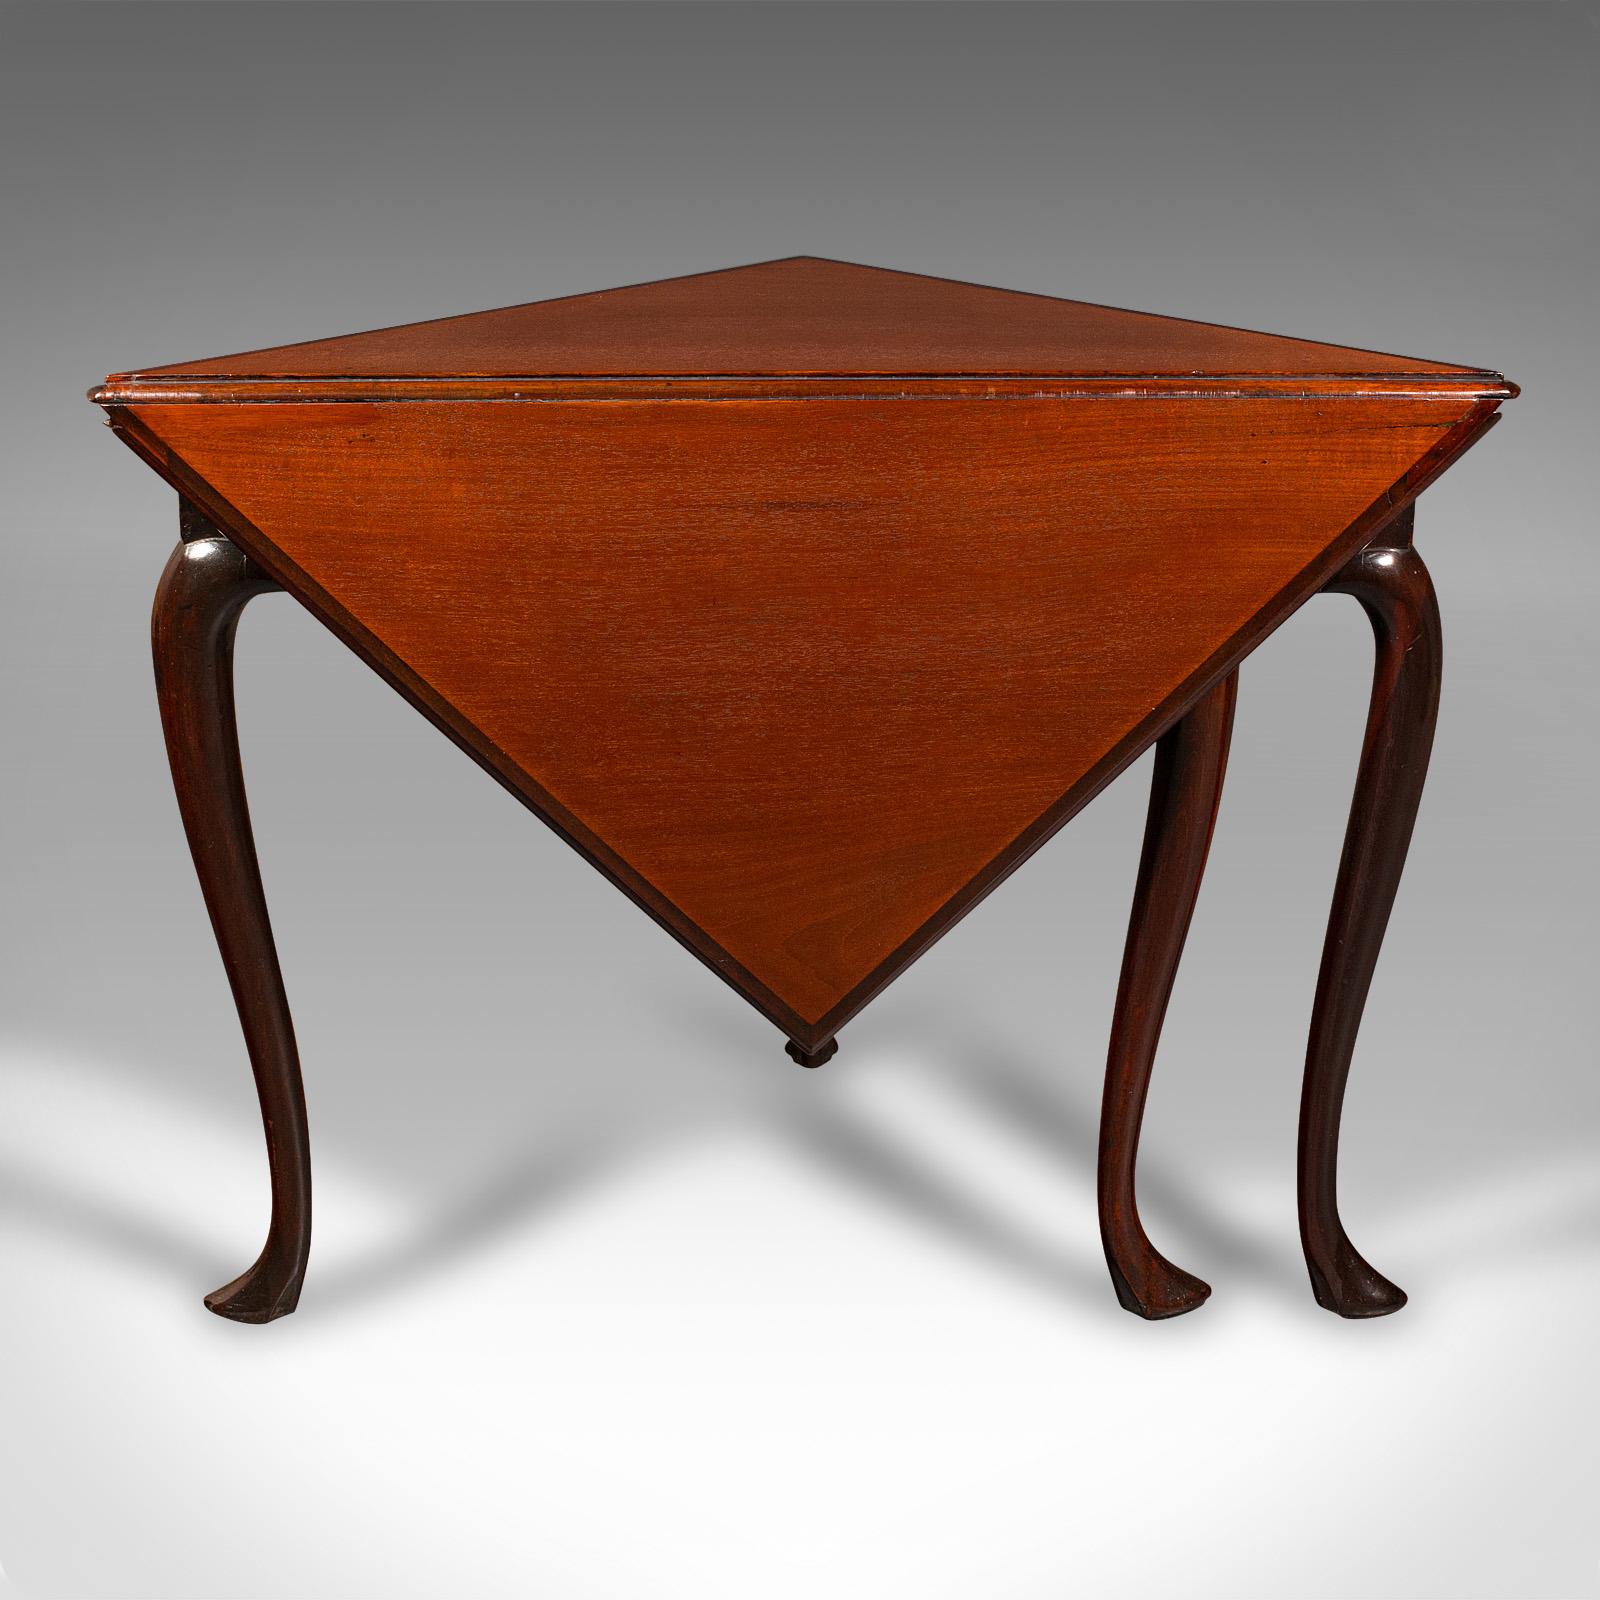 Antique Supper Table, English, Folding, Occasional, Display, Georgian, C.1770 In Good Condition For Sale In Hele, Devon, GB